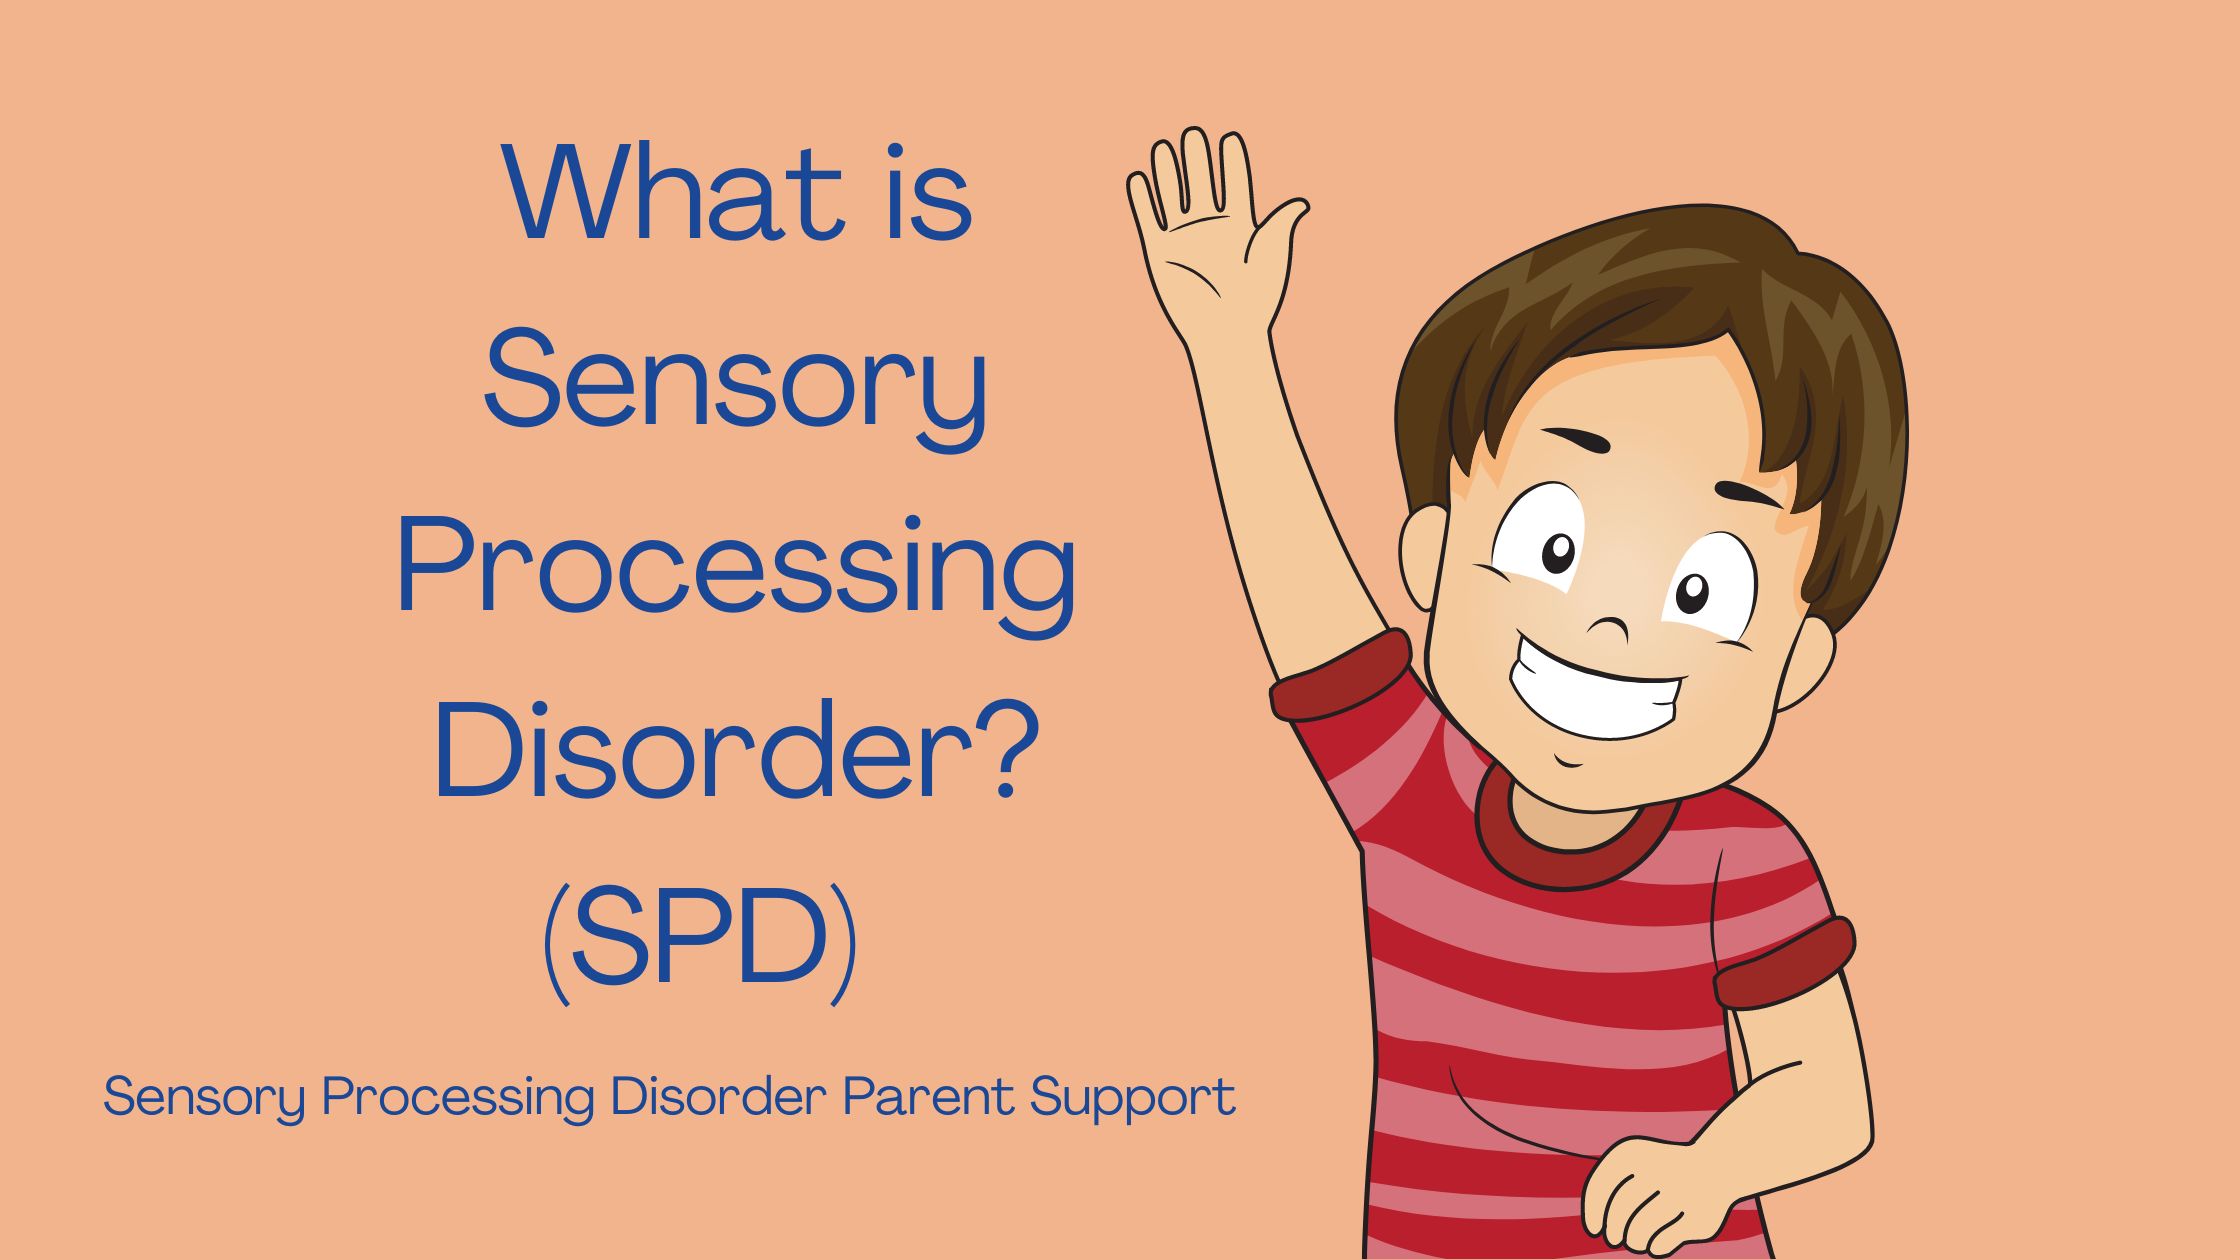 Boy with sensory processing disorder waving hello says what are sensory differences